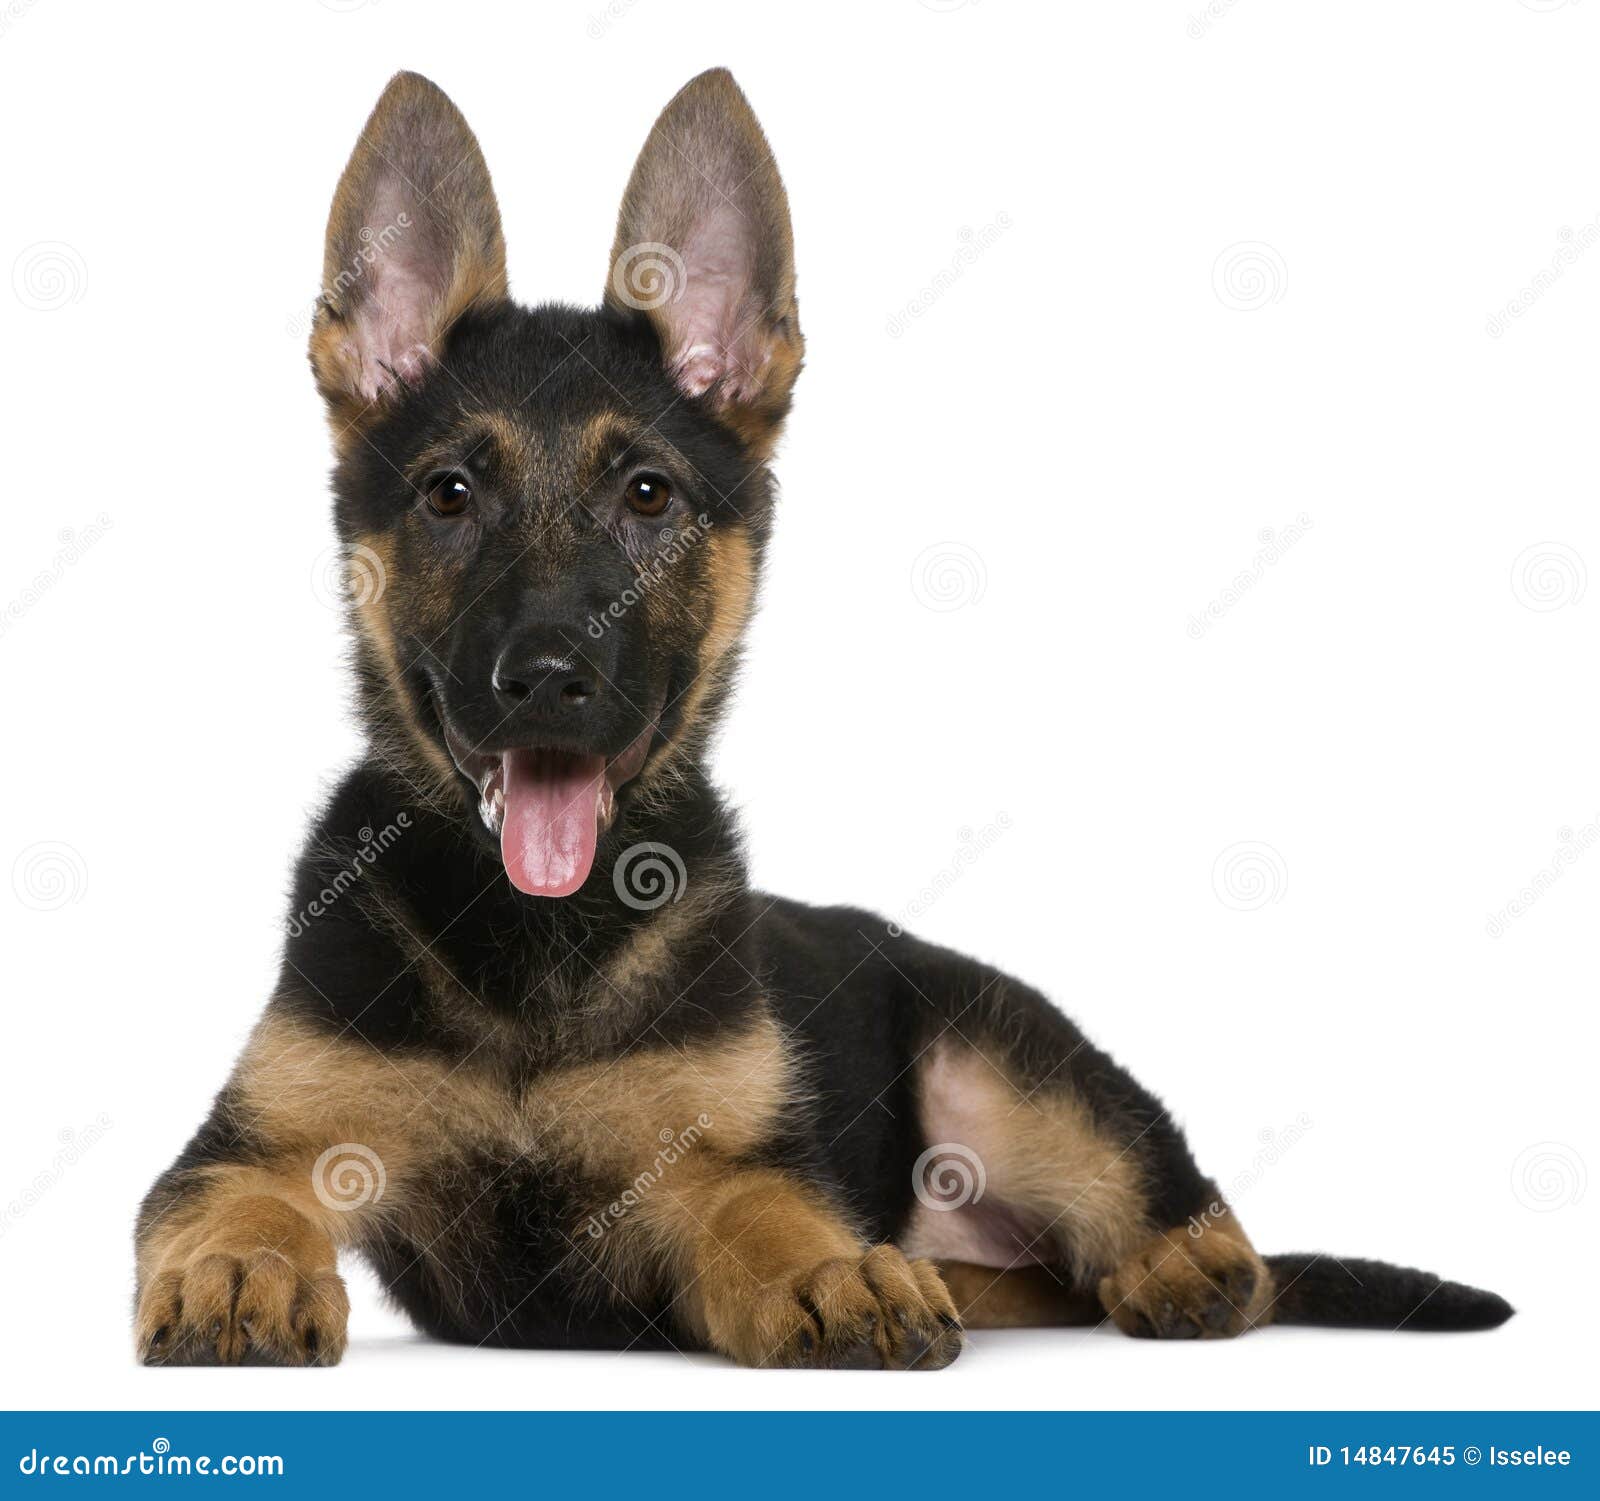 how big are german shepherds at 3 months